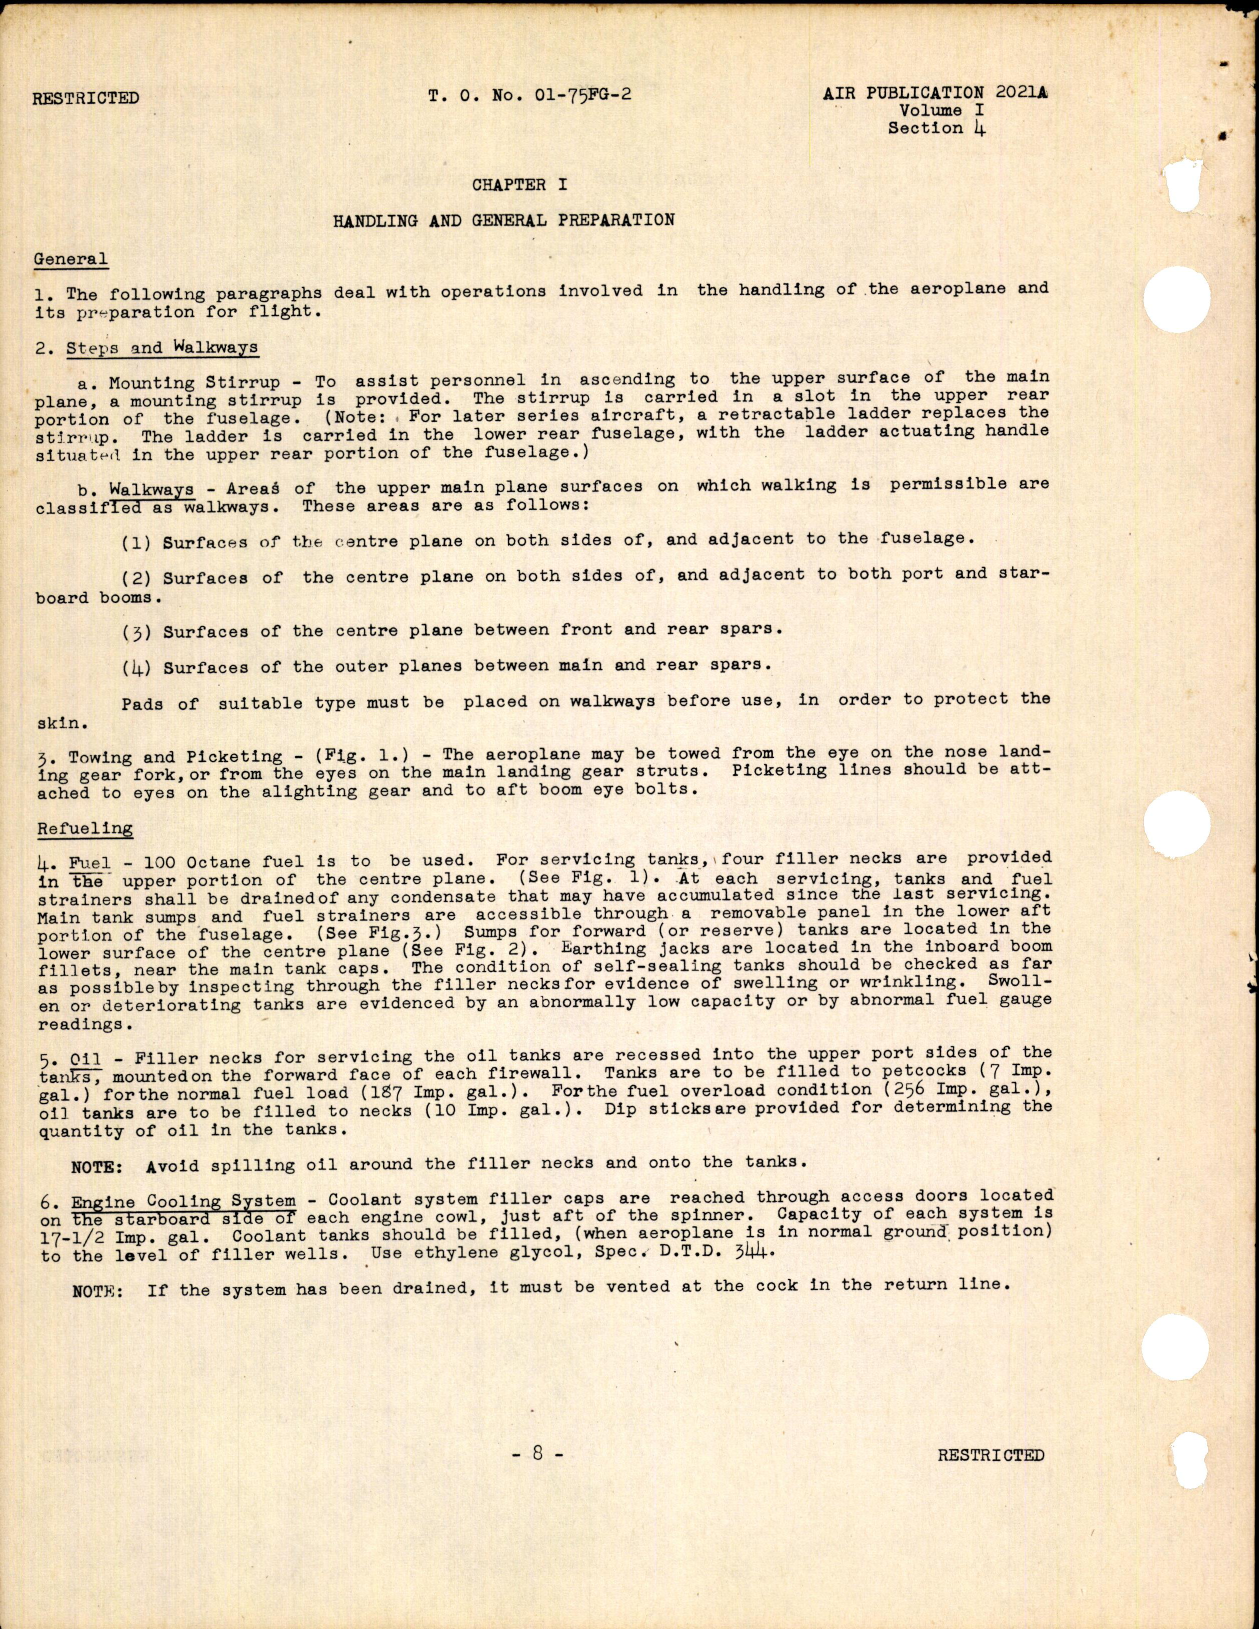 Sample page 8 from AirCorps Library document: Service Instructions for the Lightning 1 Aeroplane (Similar to AAF P-38)